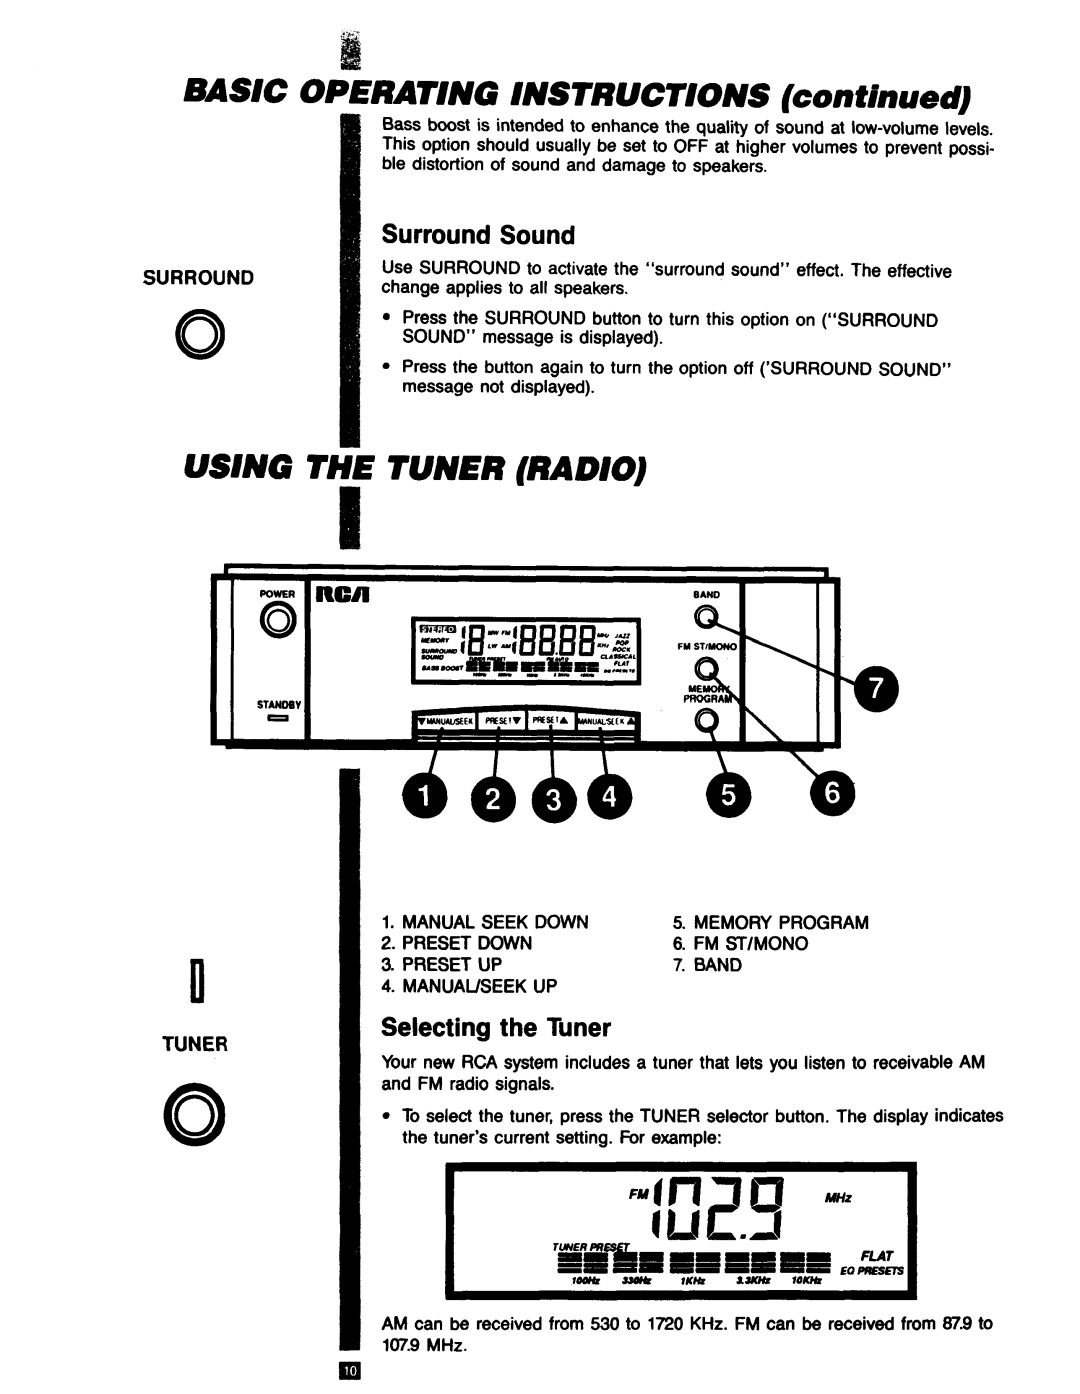 RCA RP-9753 manual BASIC OPERATING lNSTRUCTlONS continued, Using The Tuner Radio, Surround Sound, Selecting the Tuner 